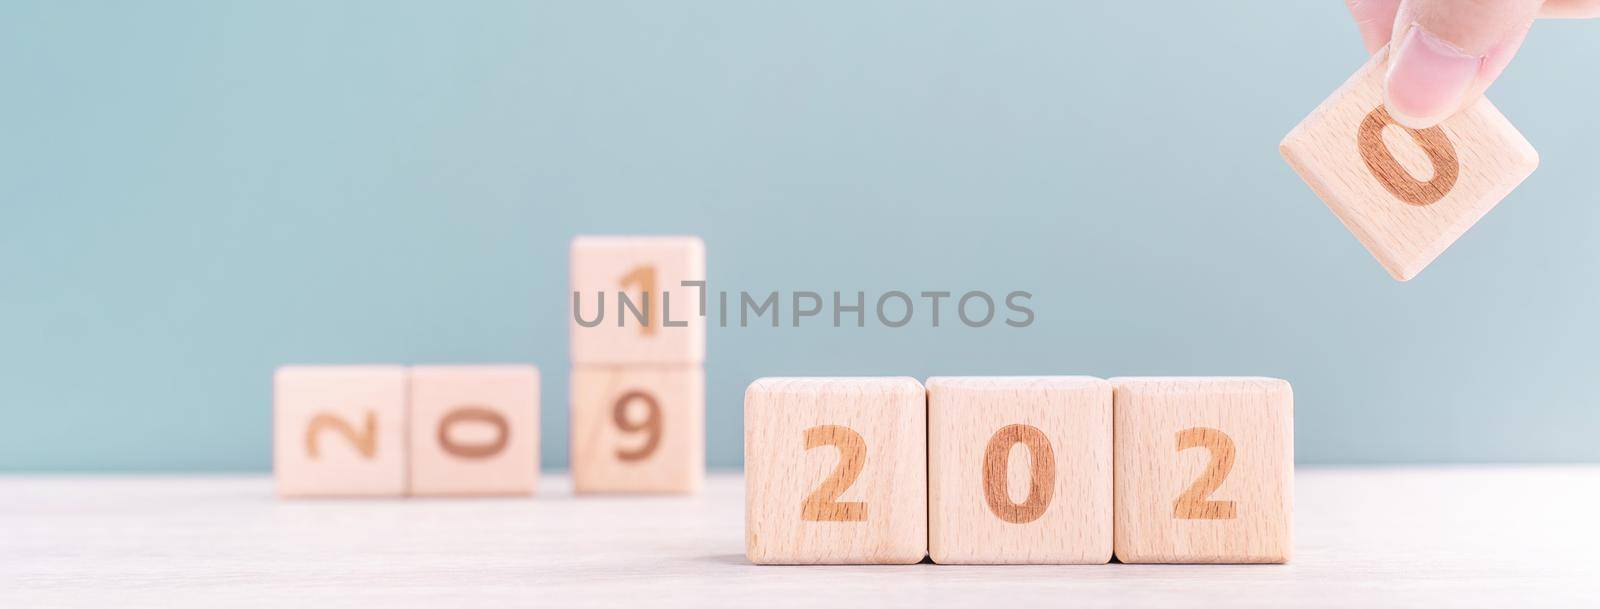 Abstract 2020 & 2019 New year countdown design concept - woman holding wood blocks cubes on wooden table and green background, close up, copy space. by ROMIXIMAGE